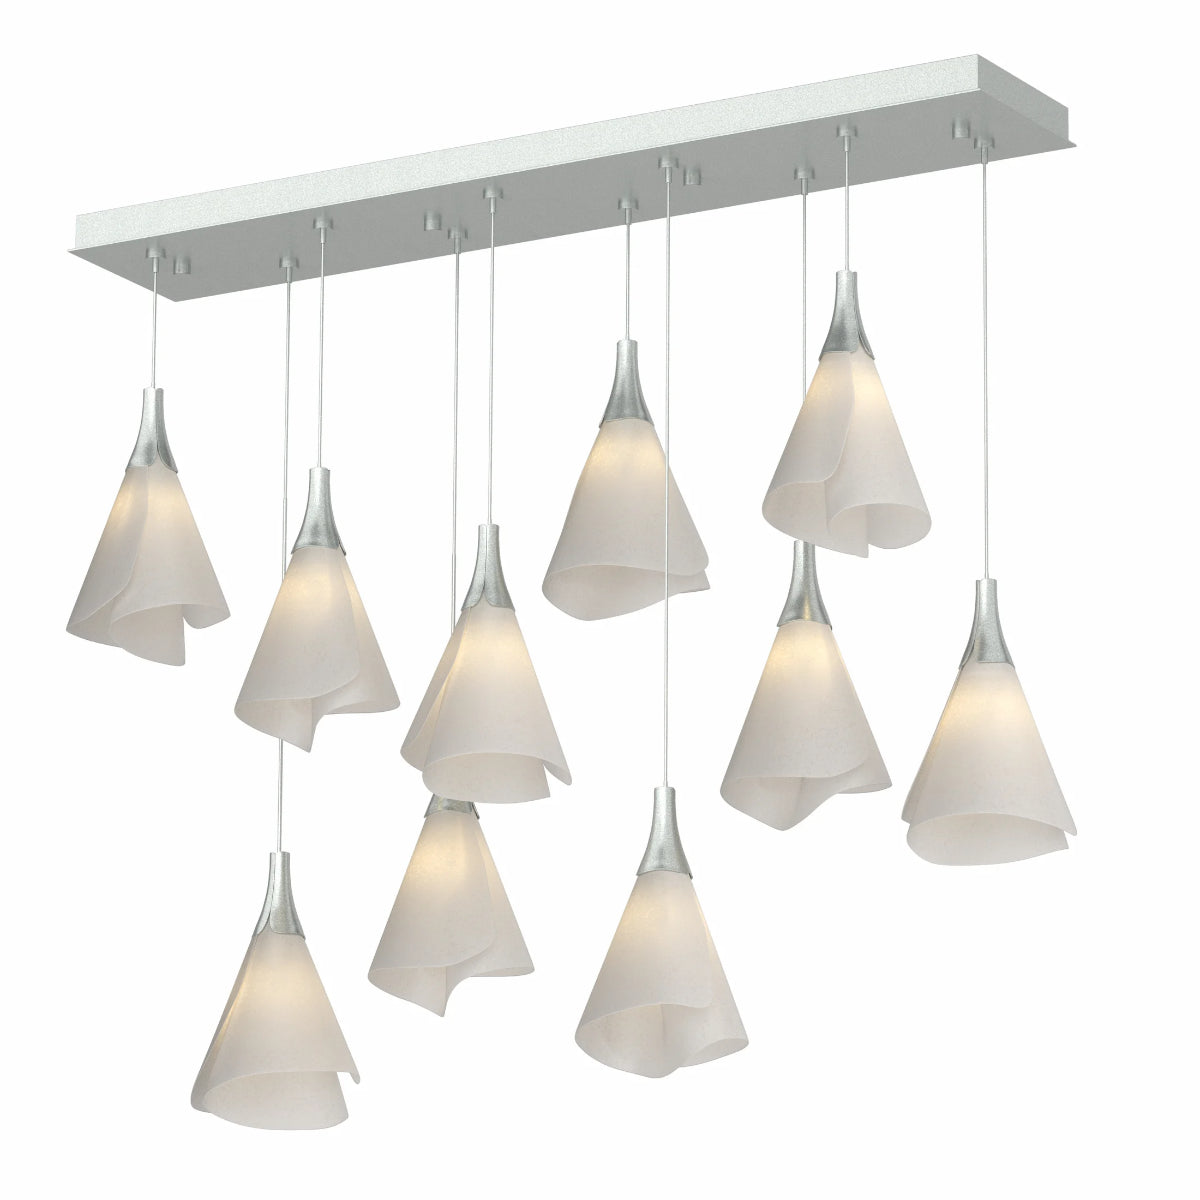 Mobius 46 in. 10 Lights Linear Pendant Light with Standard Height